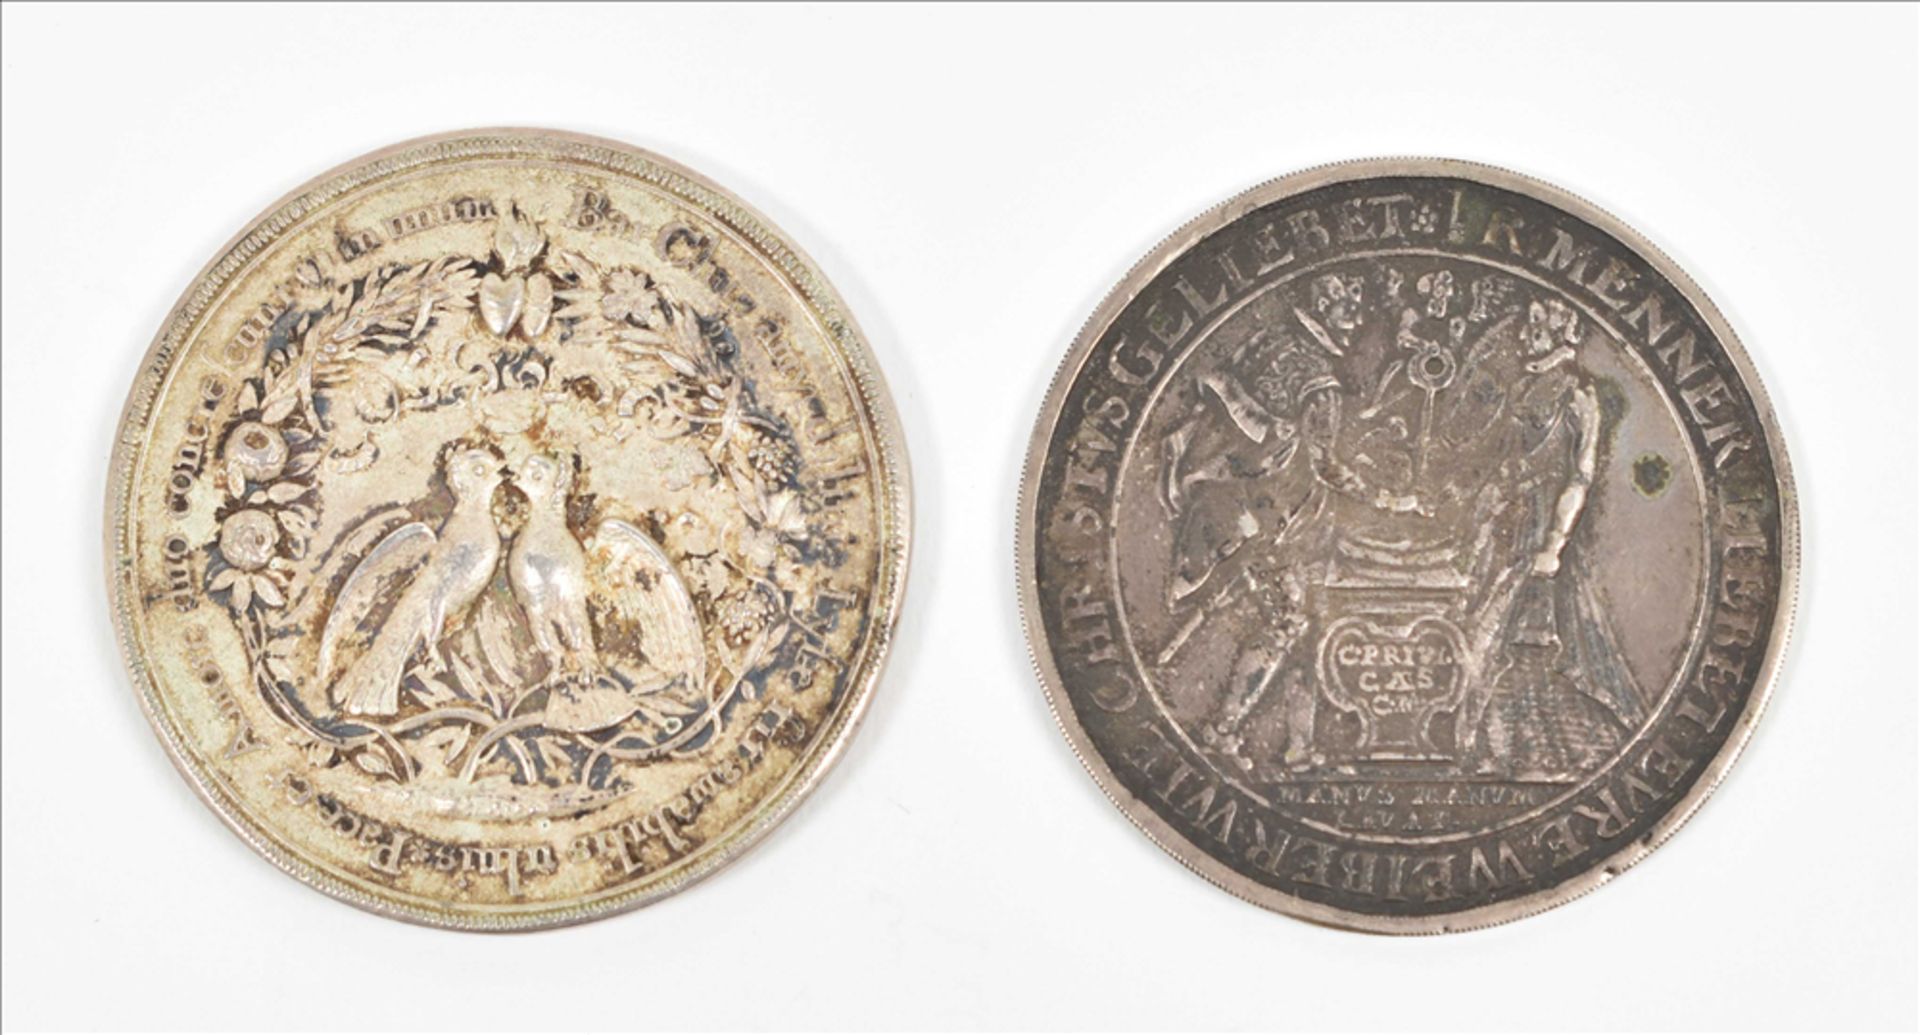 Two seventeenth century marriage medals